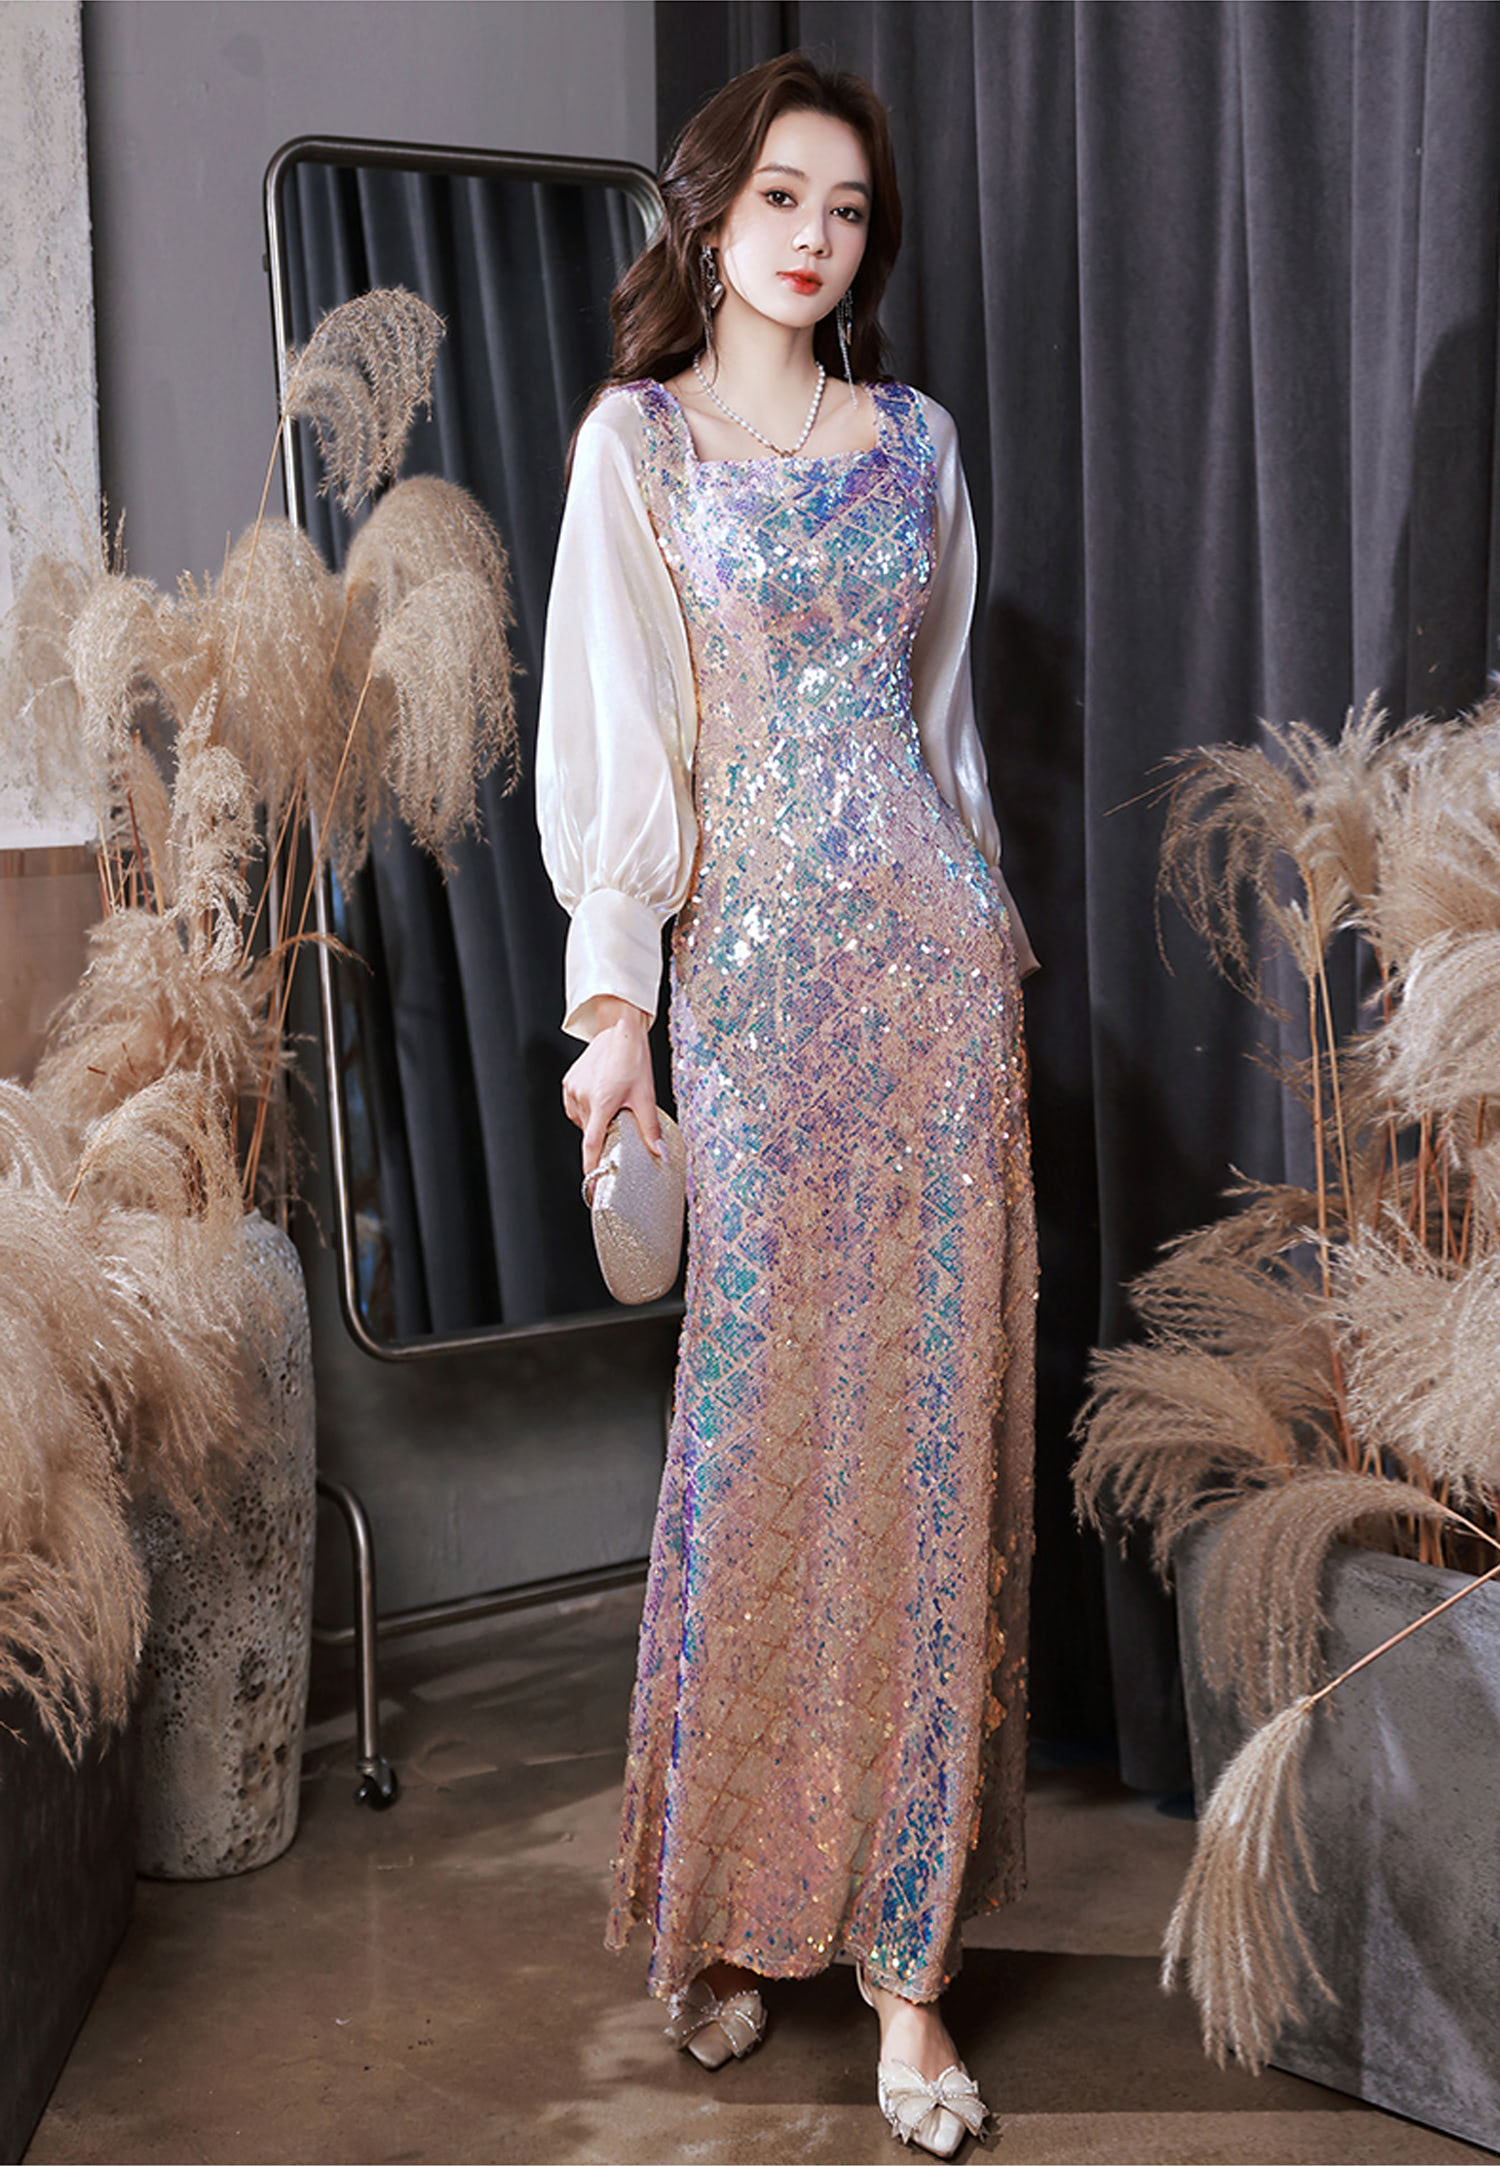 Luxury-Sparkly-Square-Neck-Long-Sleeve-Banquet-Party-Fishtail-Dress15